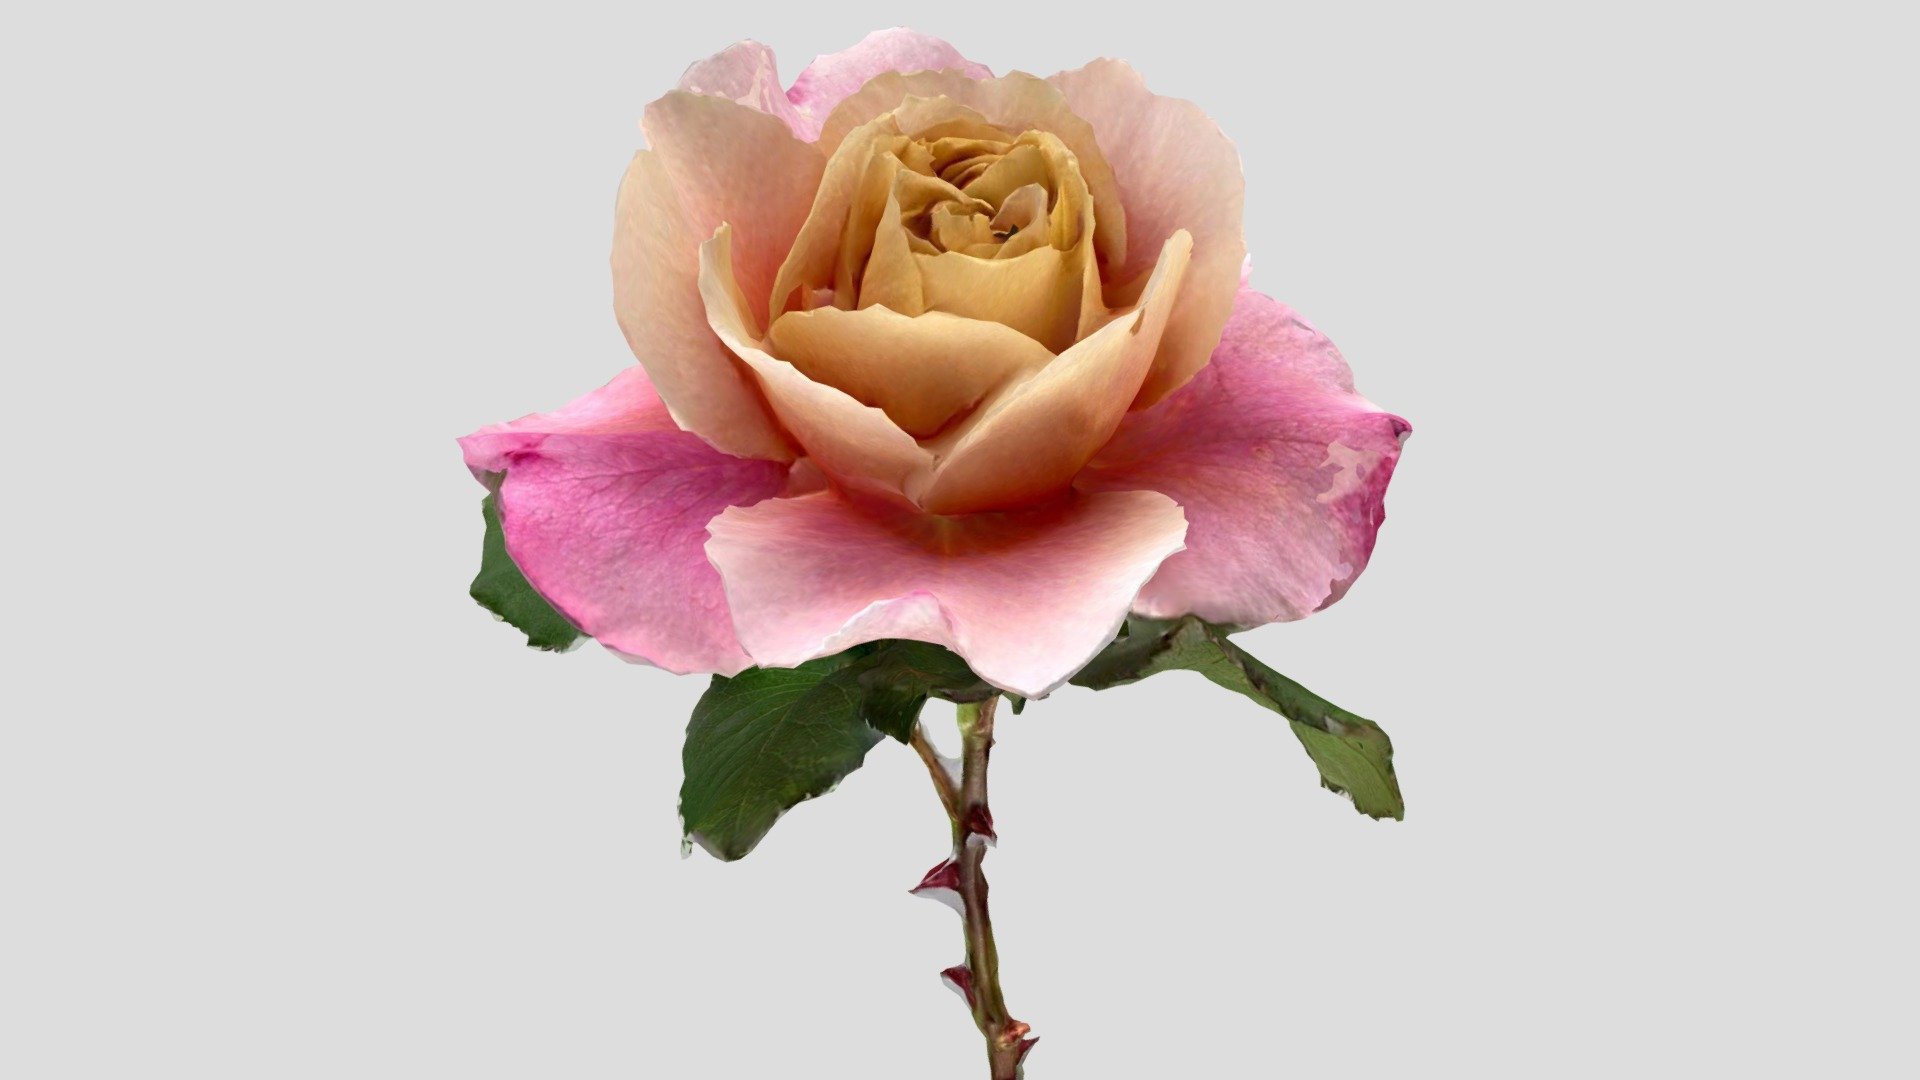 I did a 3D scan of a rose blooming in my garden.The name of the rose is Distant Drums.As the flowers open, the color changes from pink to orange to purple.
I scanned it with WIDAR app 3d model